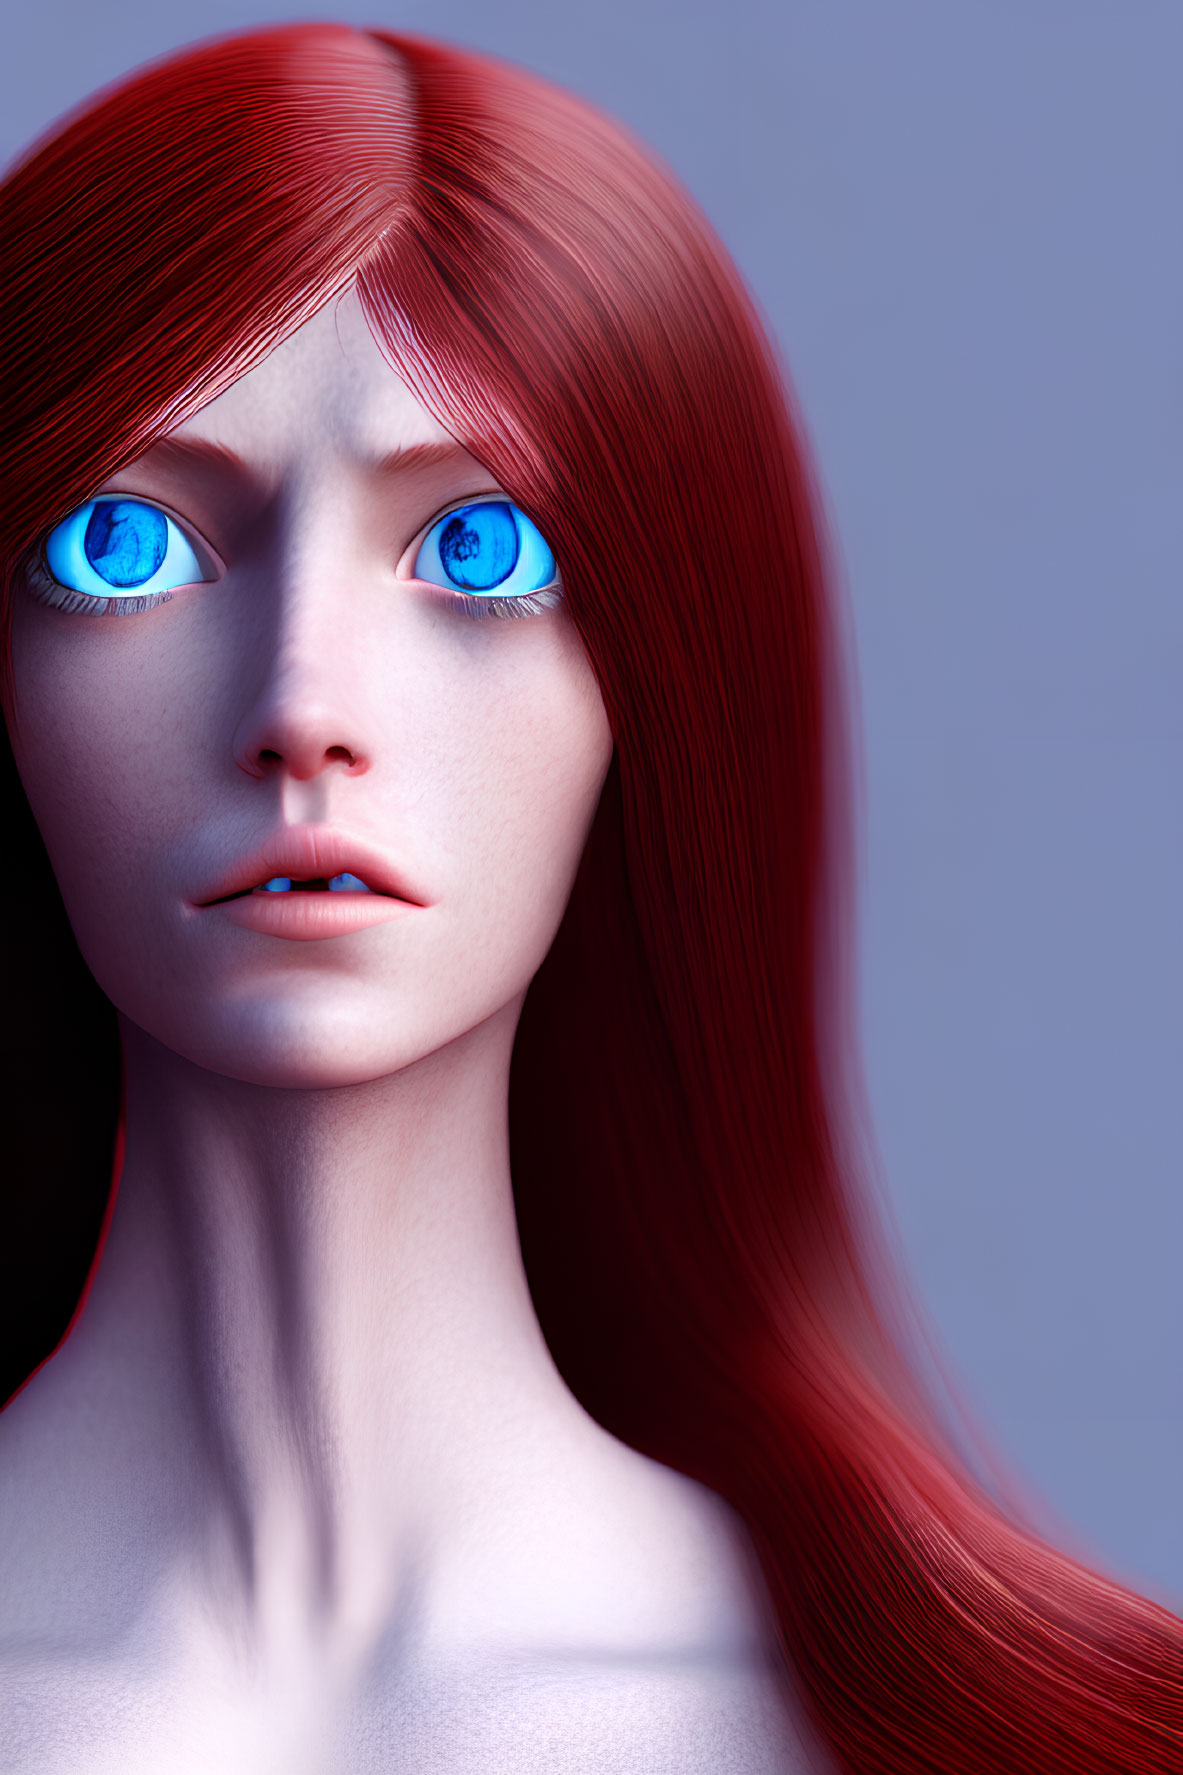 3D Rendered Female Character with Red Hair and Blue Eyes